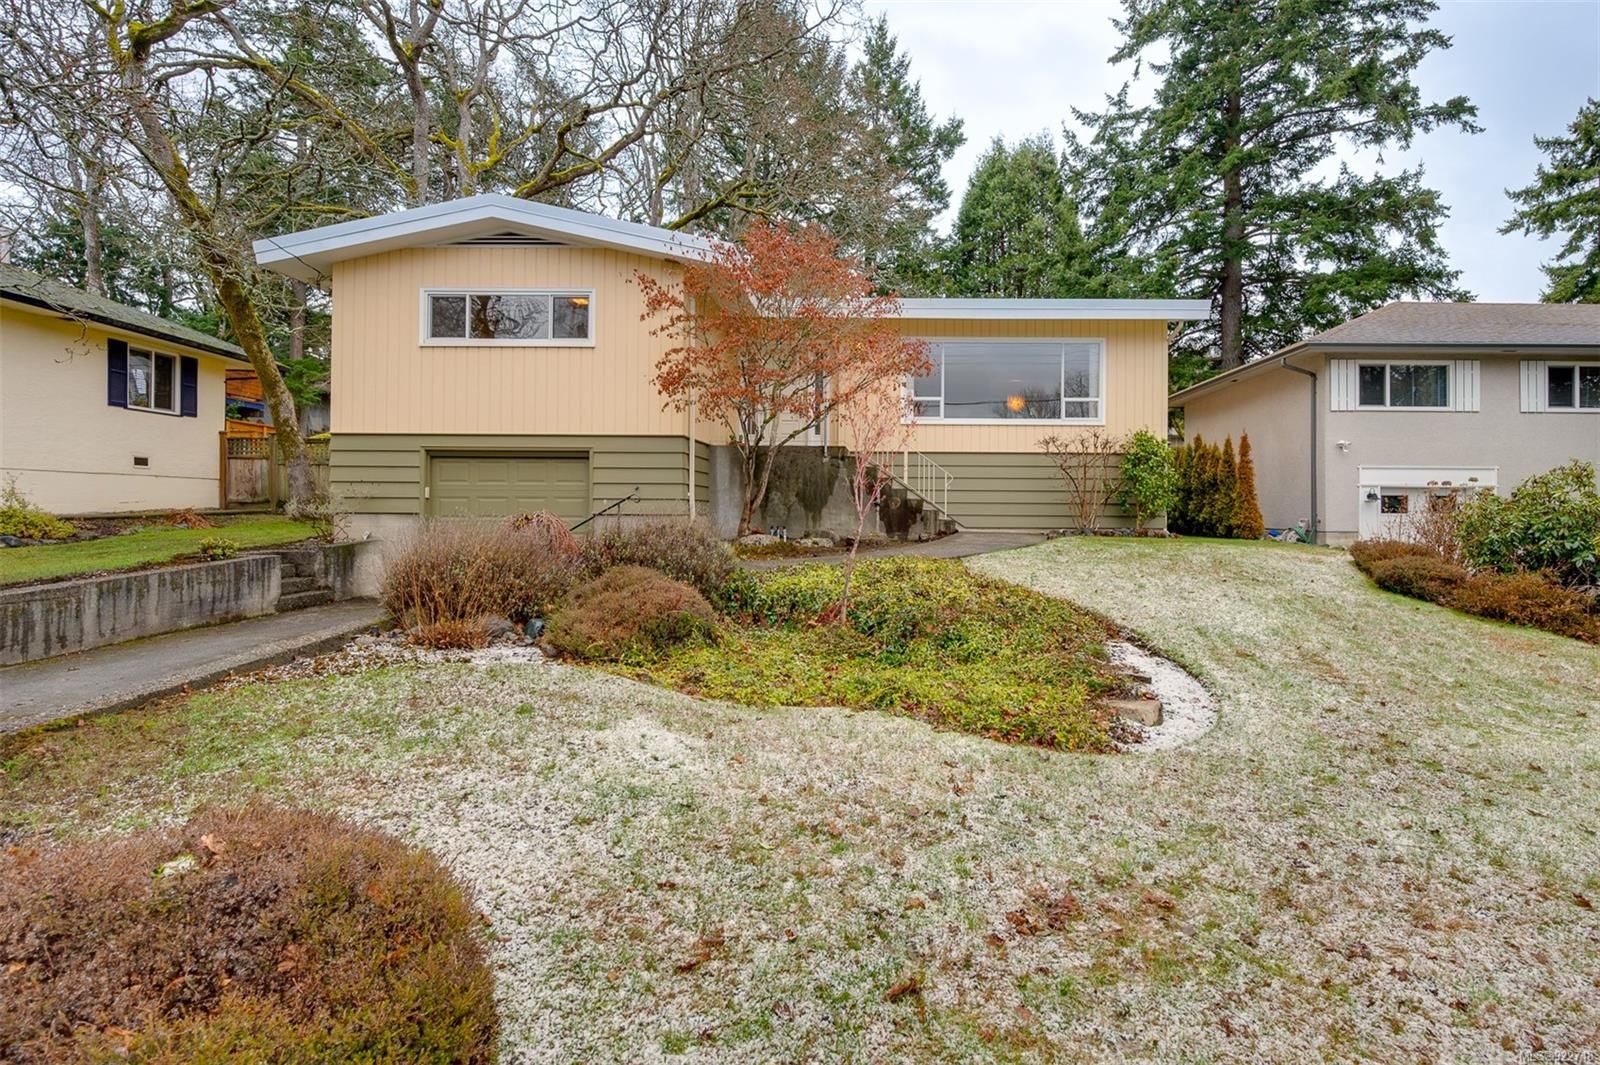 JUST LISTED: 1275 Tracksell Ave in Saanich - $1,049,000